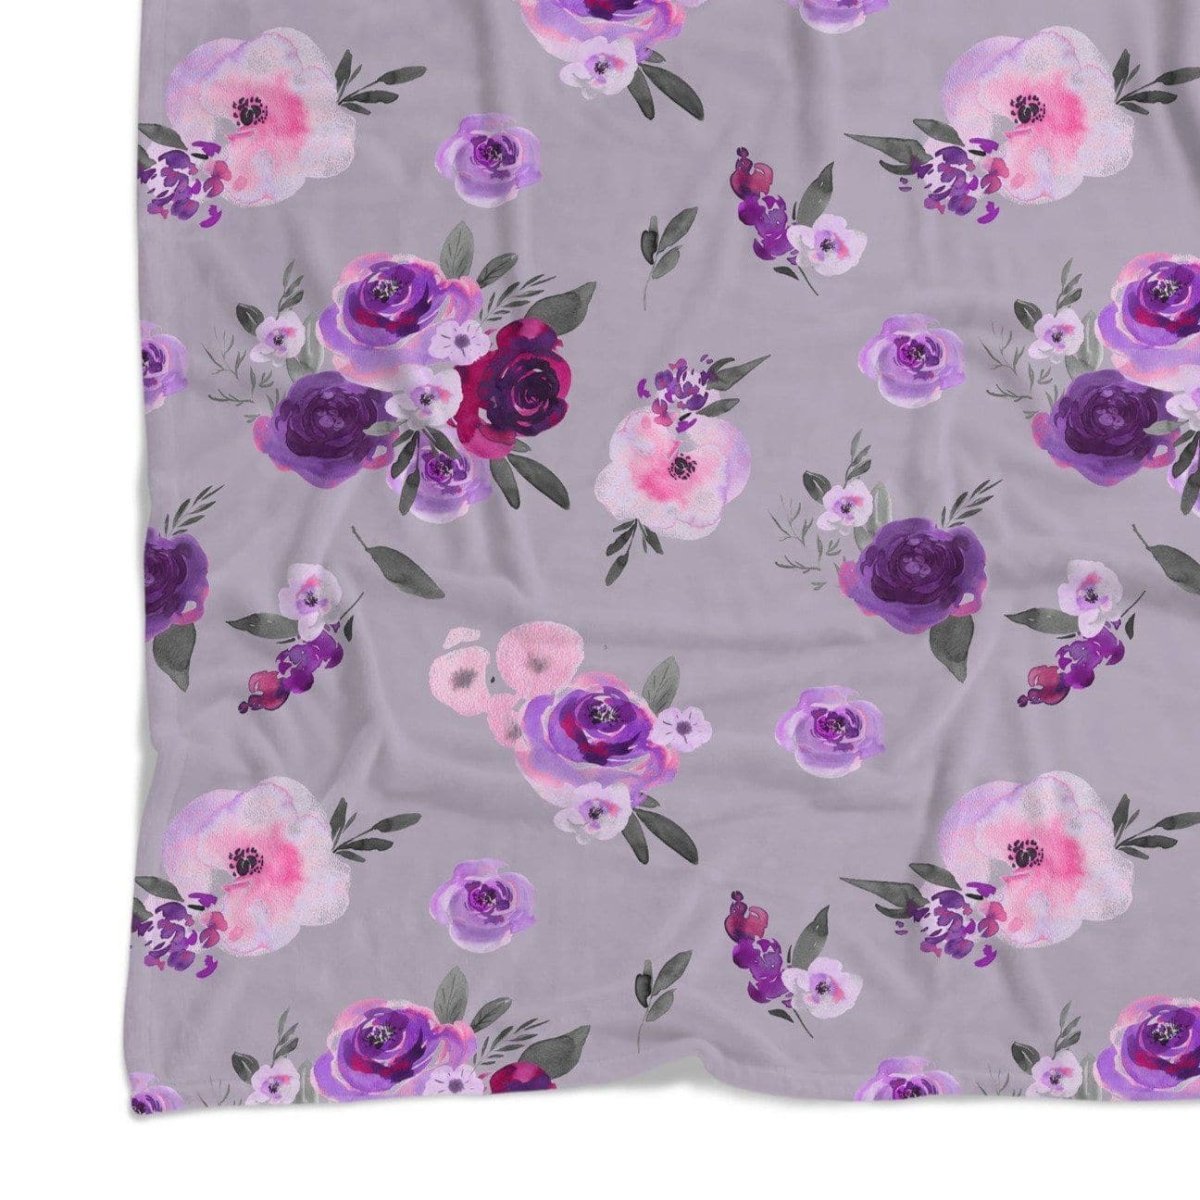 Purple Floral on Gray Minky Blanket - gender_girl, Personalized_No, Purple Floral